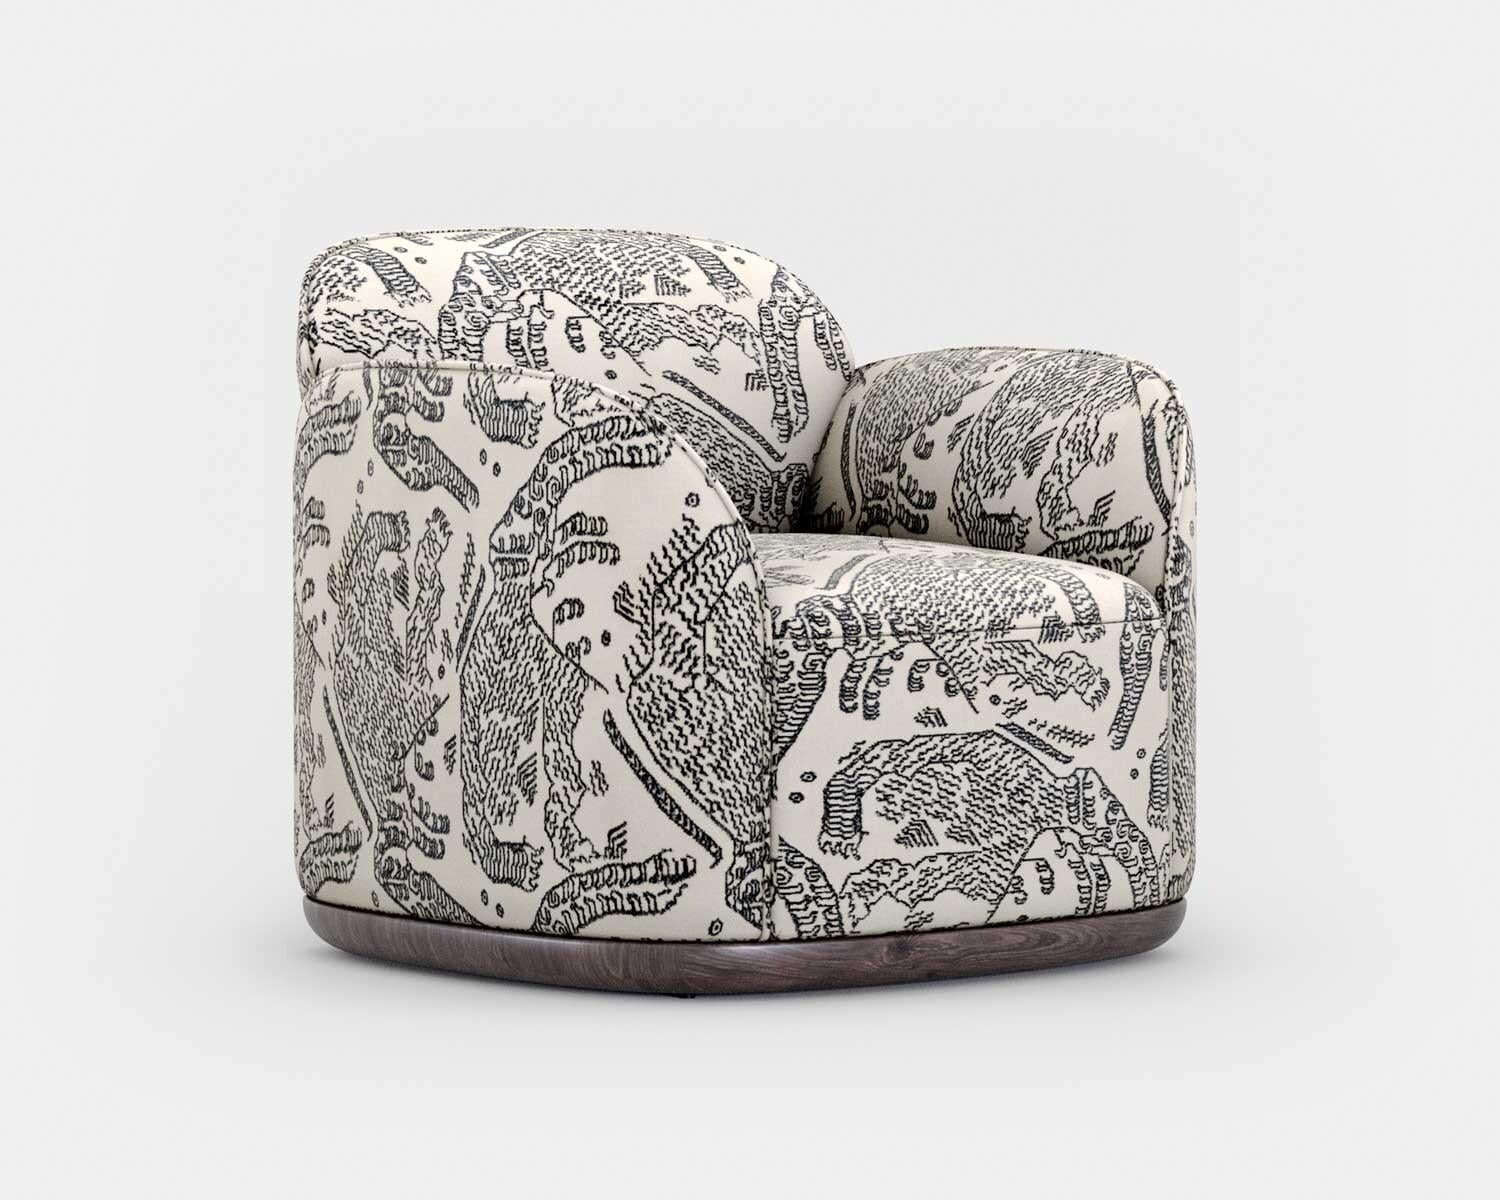 Unio armchair by Poiat 
Designers: Timo Mikkonen & Antti Rouhunkoski 

Collection UNIO 2021

Dimensions: H. 72 x W. 75 D. 72 SH. 40
Model shown: Tiger mountain (graphite) by Dedar
 
The Unio Collection, featuring an armchair and sofas, opens